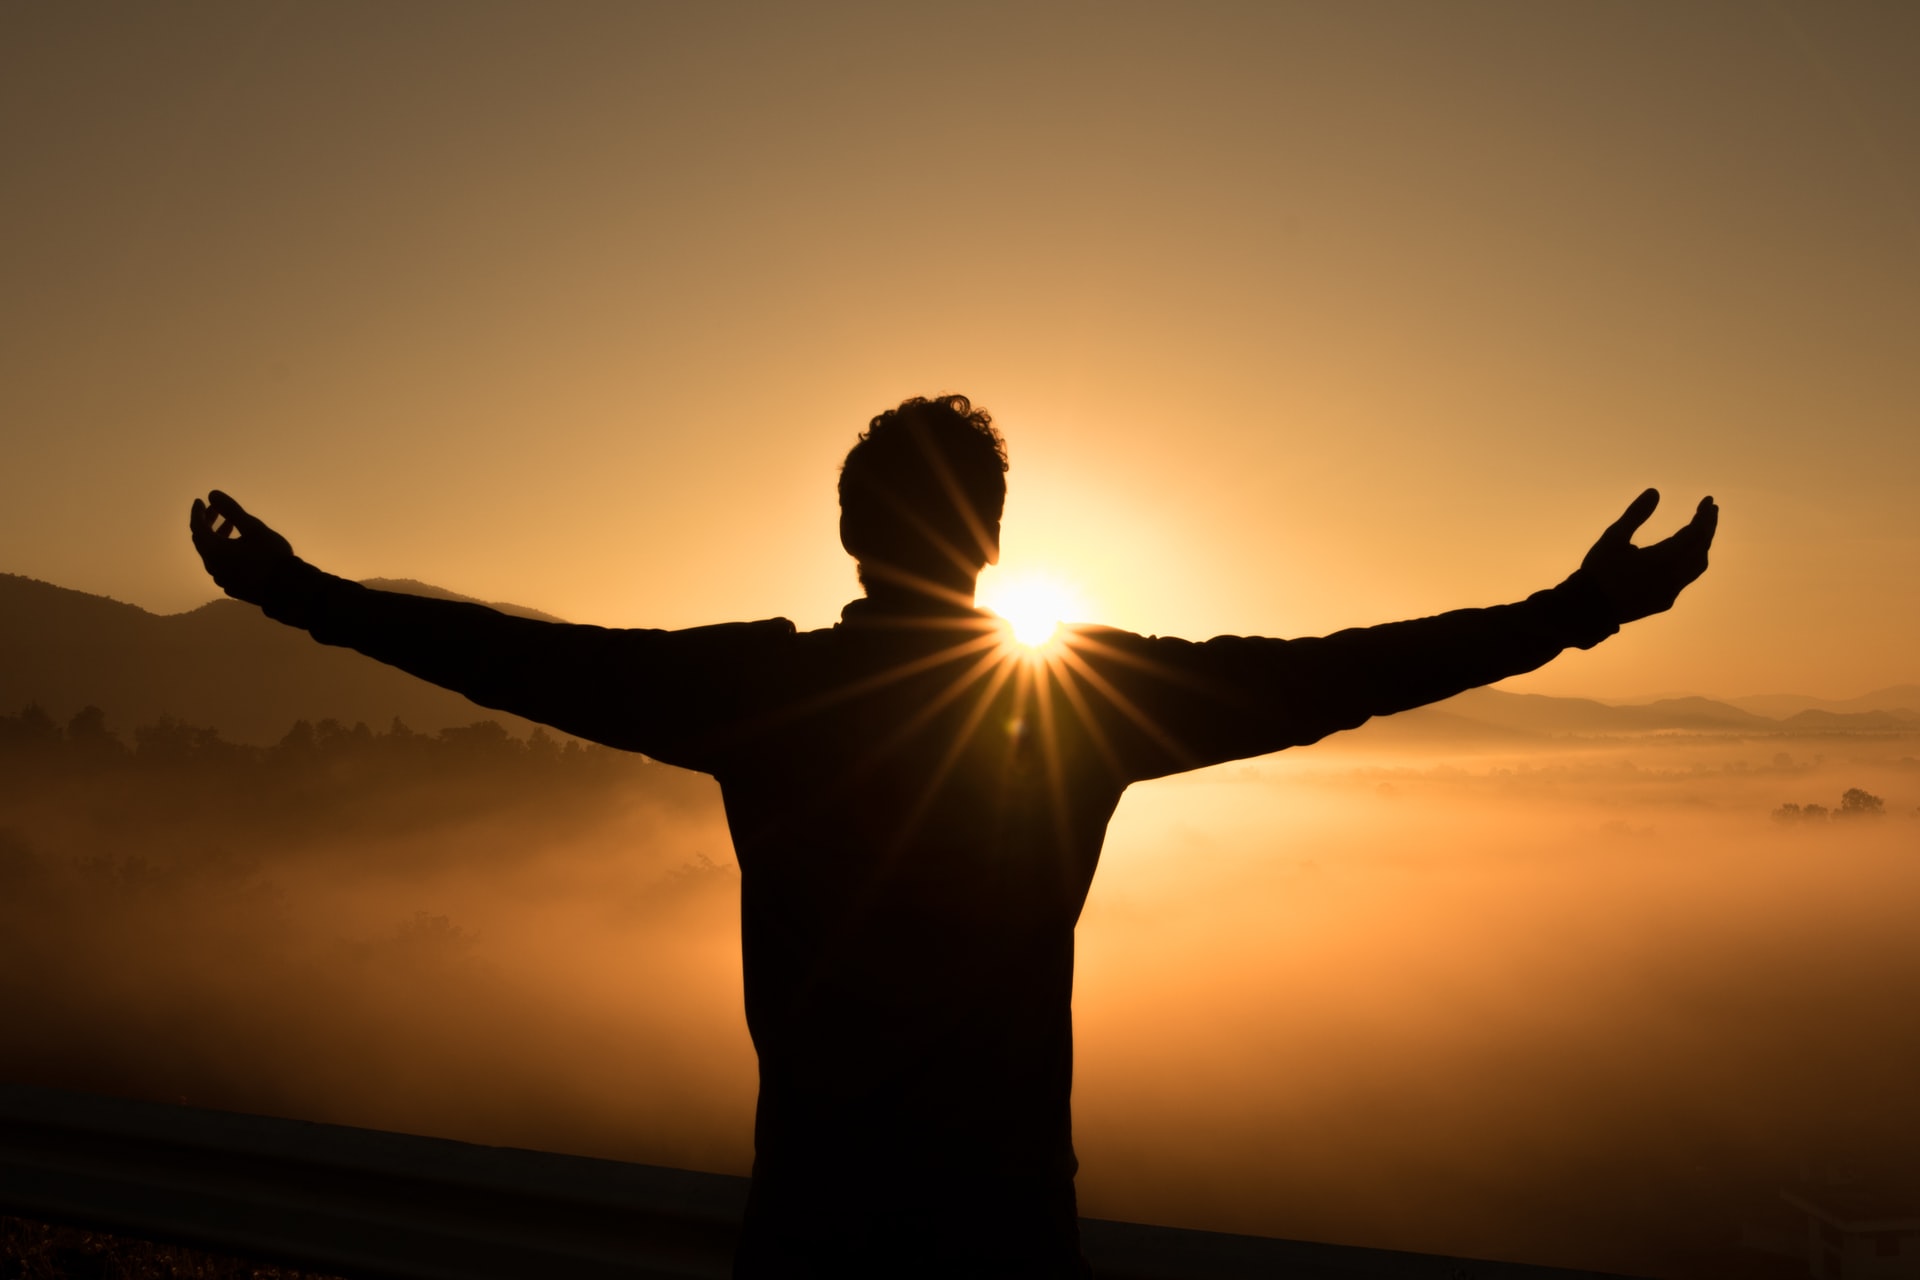 Man with arms raised up during a sunset